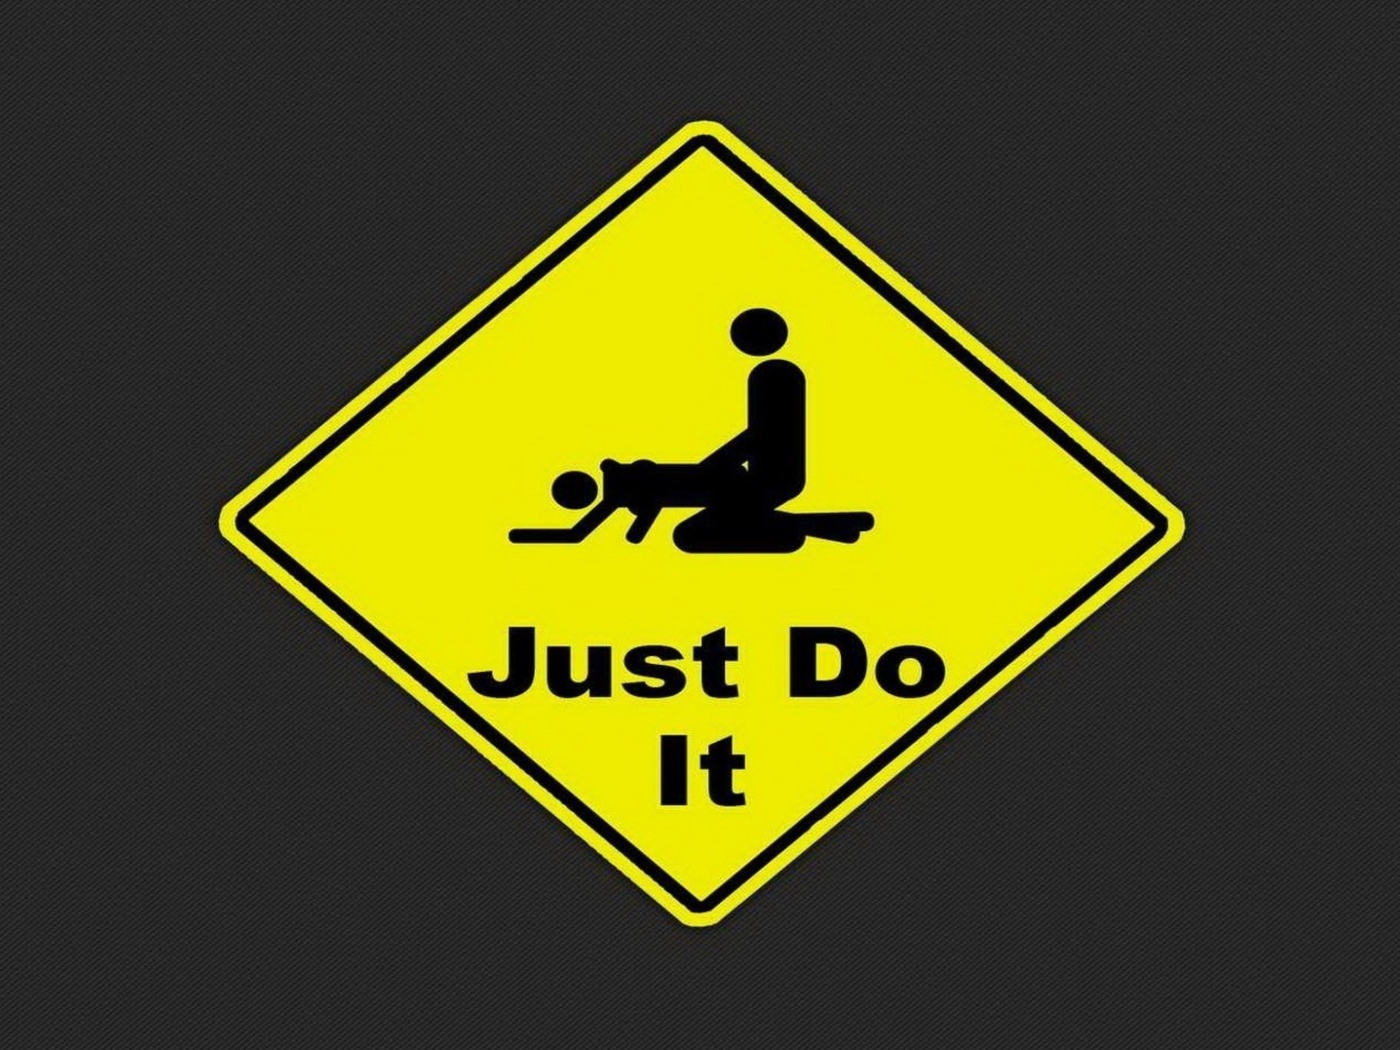 Das Just Do It Funny Sign Wallpaper 1400x1050